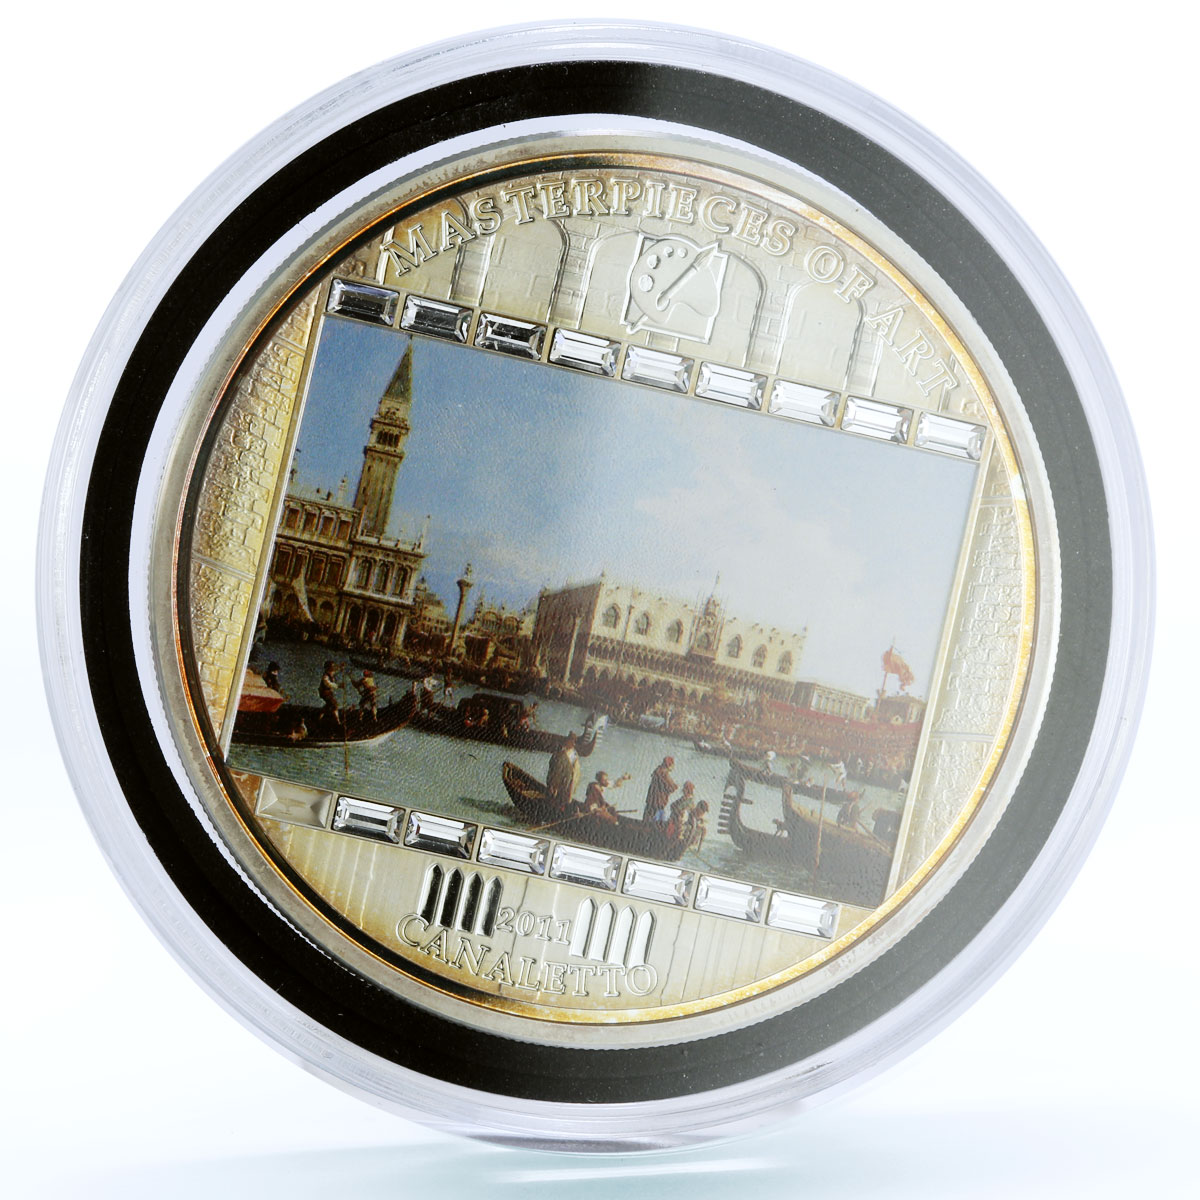 Cook Islands 20 dollars Canaletto Art Return of the Bucintoro silver coin 2011